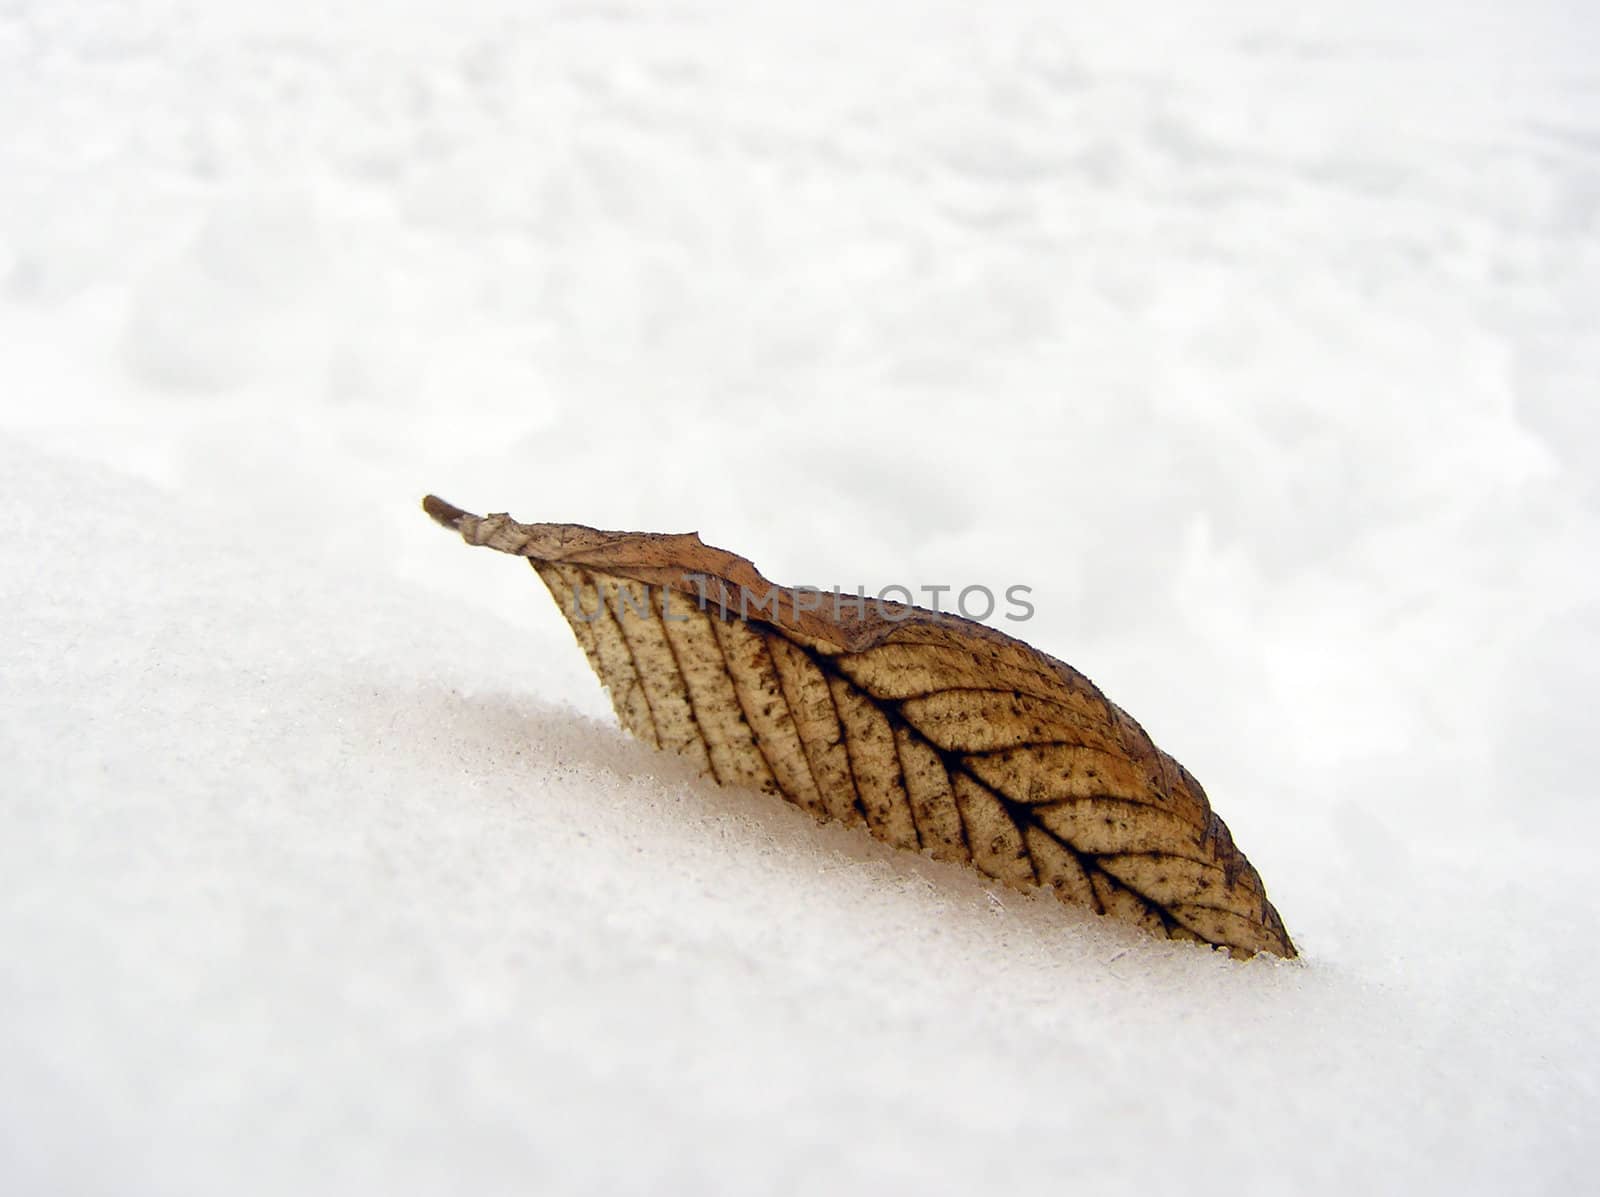 The yellow leaf on the snow background